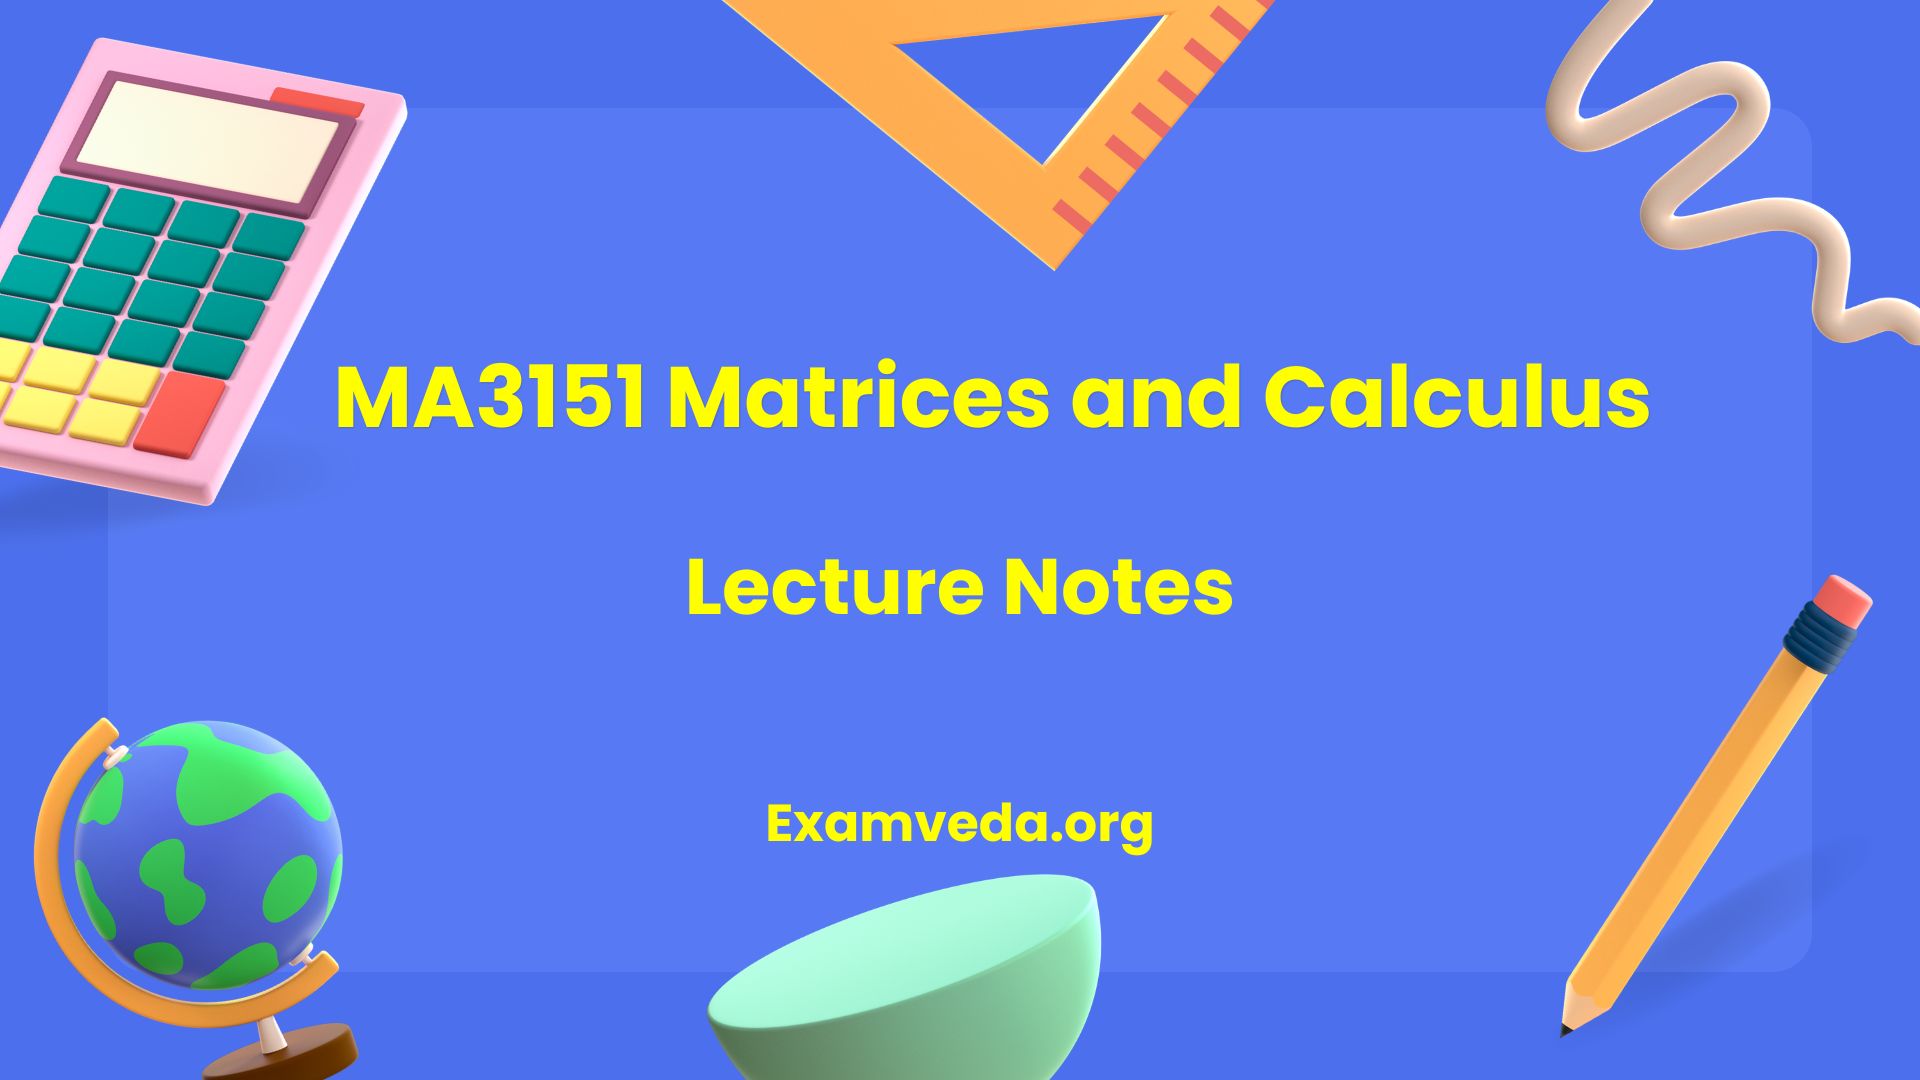 MA3151 Matrices and Calculus Lecture Notes